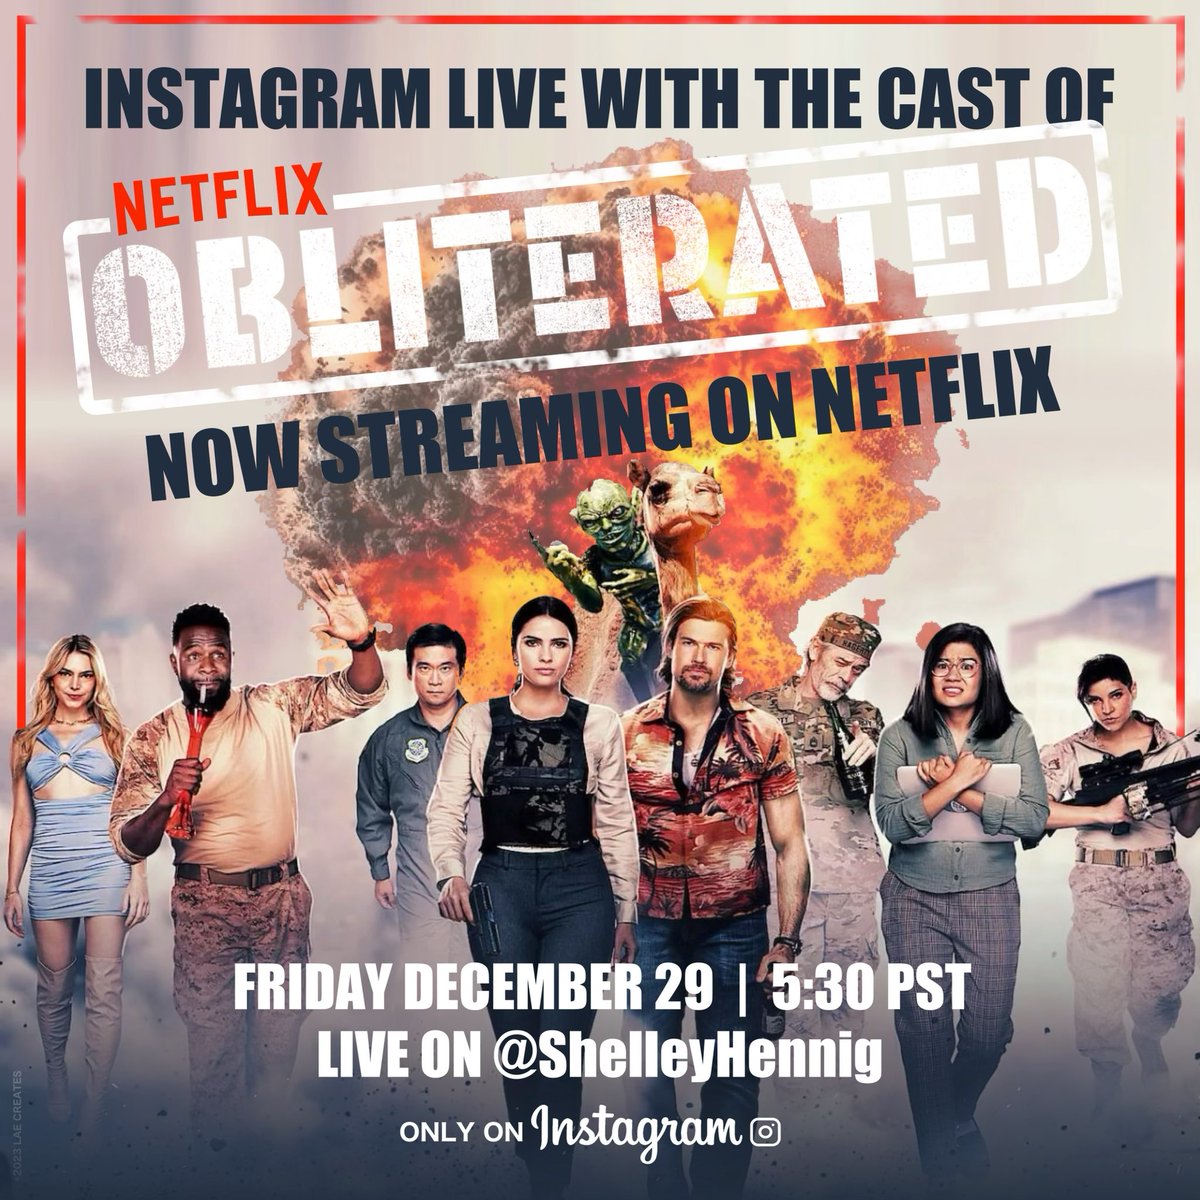 Out a month and Obliterated is still Top 10 in 60 countries around the world! Thank you for watching and spreading the word over the holidays! Let’s keep the party going at @shelleyhennig’s Instagram tomorrow for a livestream with our amazing cast! 5:30 p.m. PST! #Obliterated…